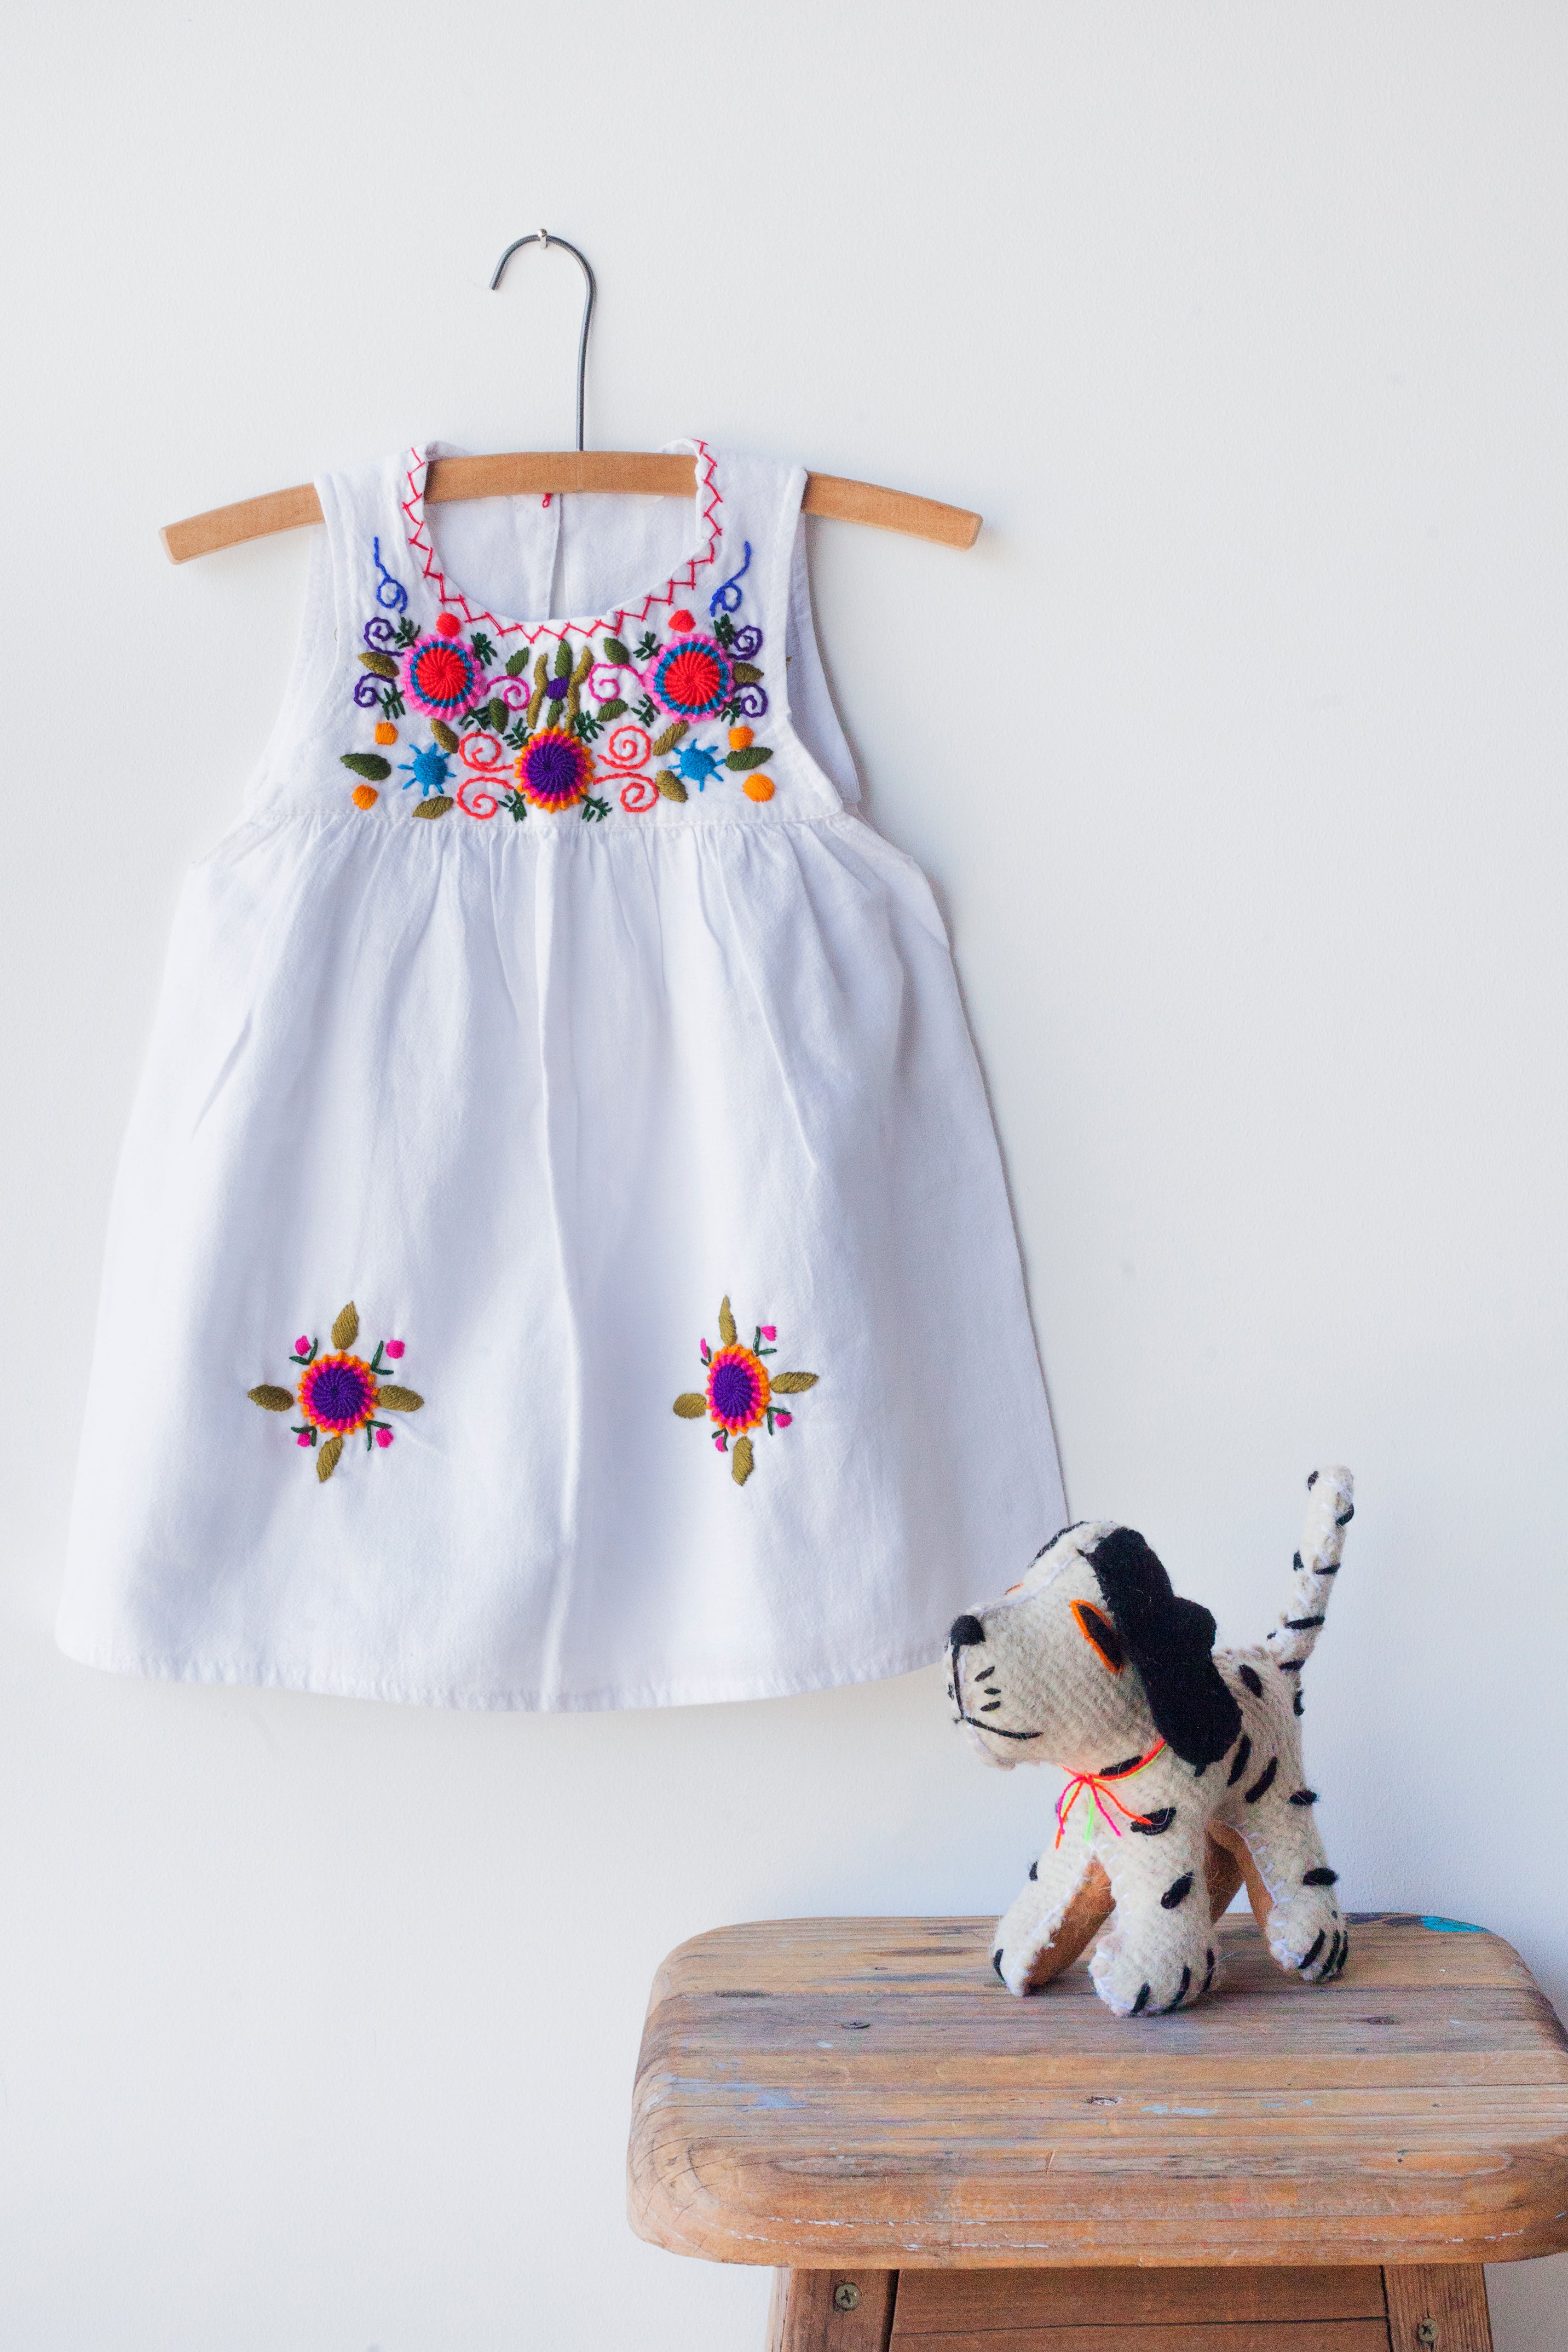 Kids sleeveless white sun dress hanging with multicolor hand-embroidered floral pattern on chest and two hand-embroidered flowers near the bottom of the skirt on the front left and right.